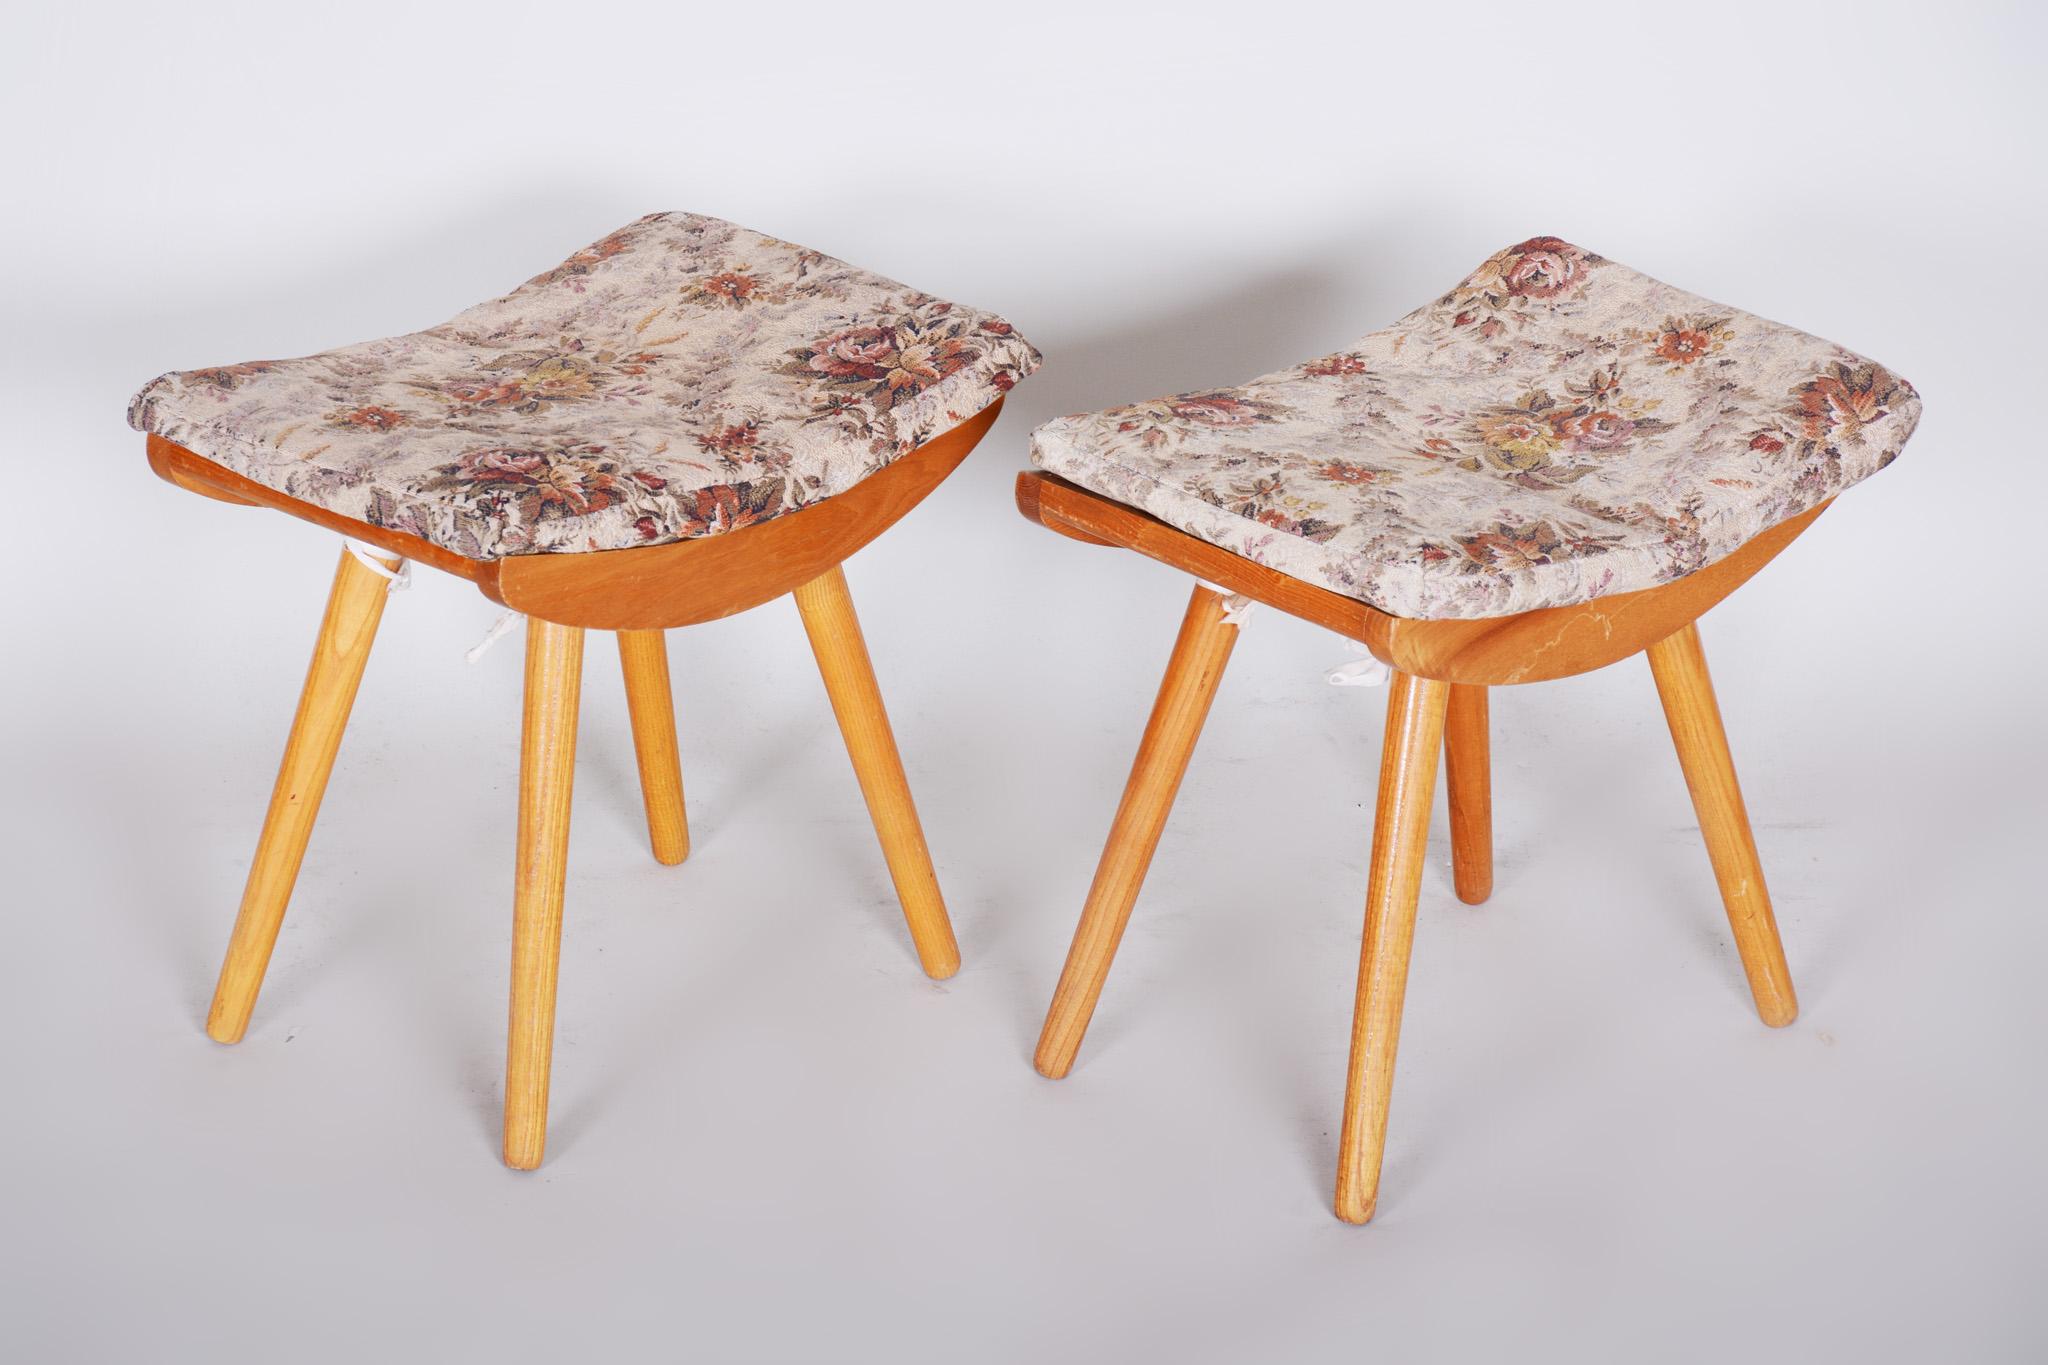 Czech Pair of Midcentury Ash Stools, 1960s, Original Preserved Condition For Sale